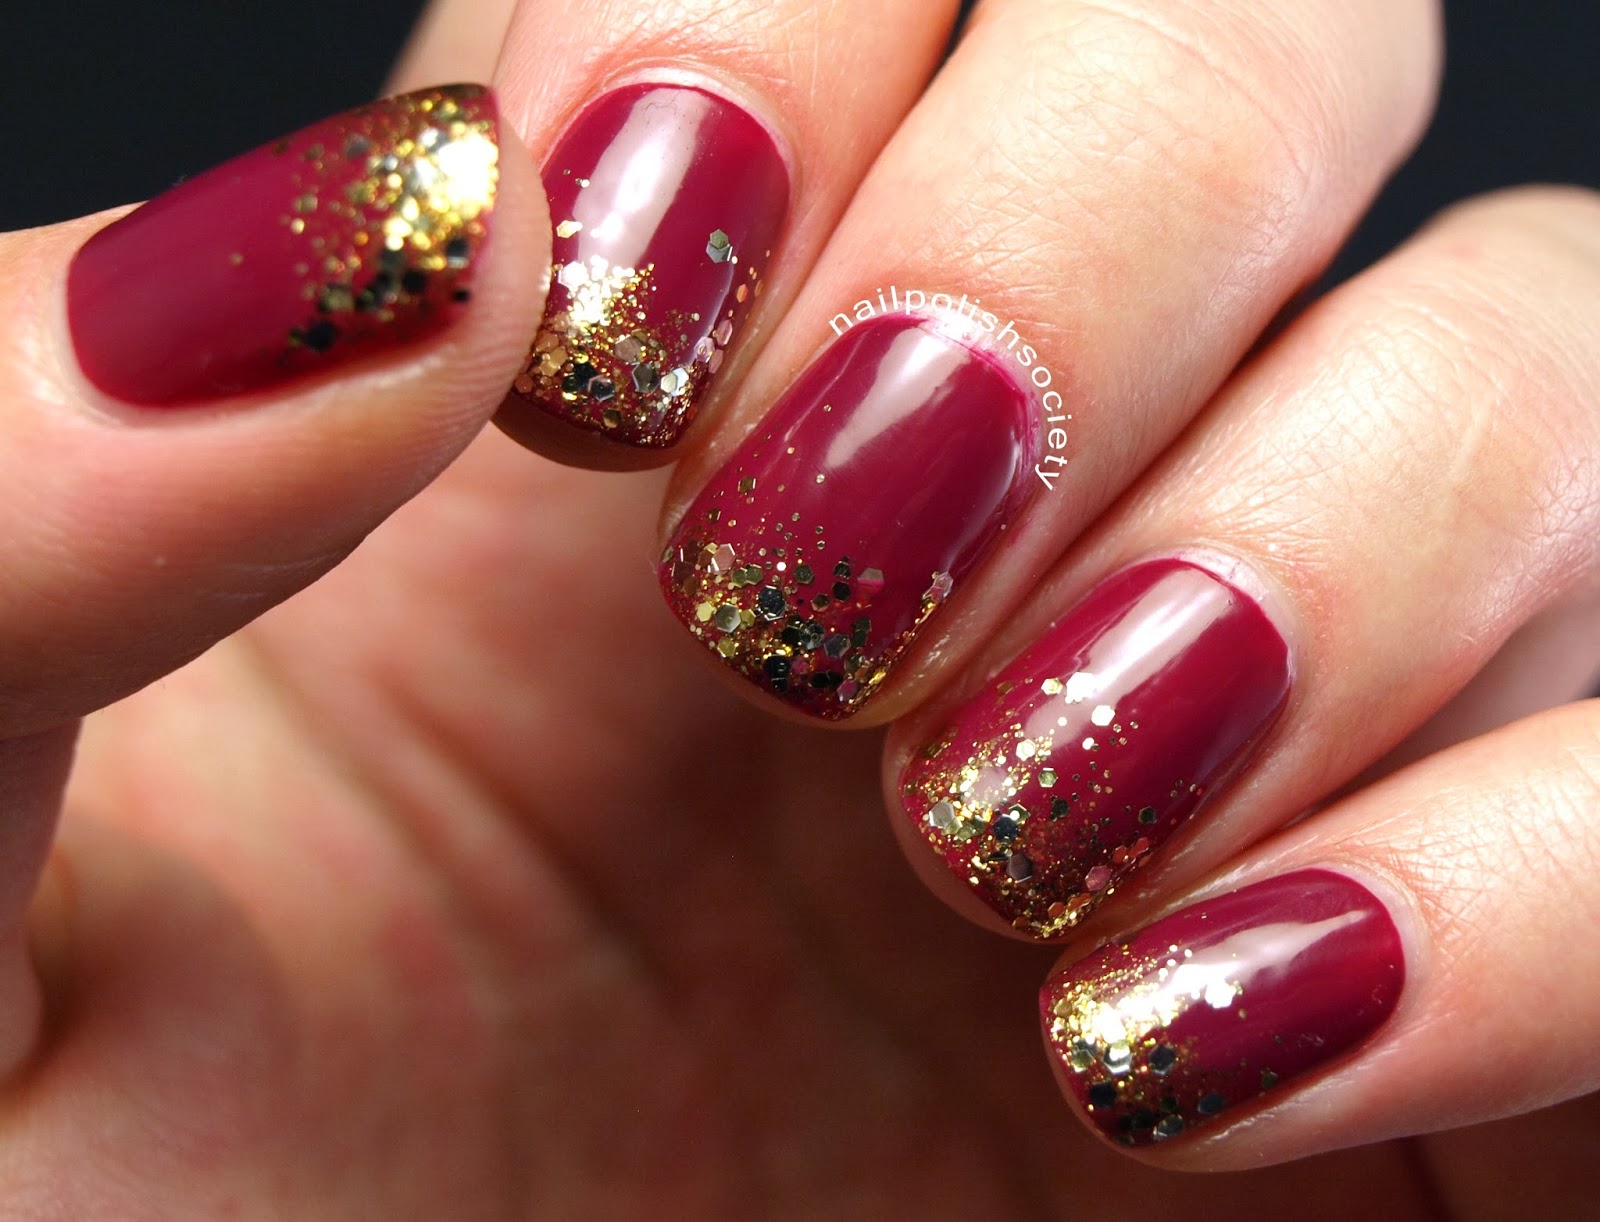 5. "The Perfect Holiday Nail Color for Your Next Party" - wide 4